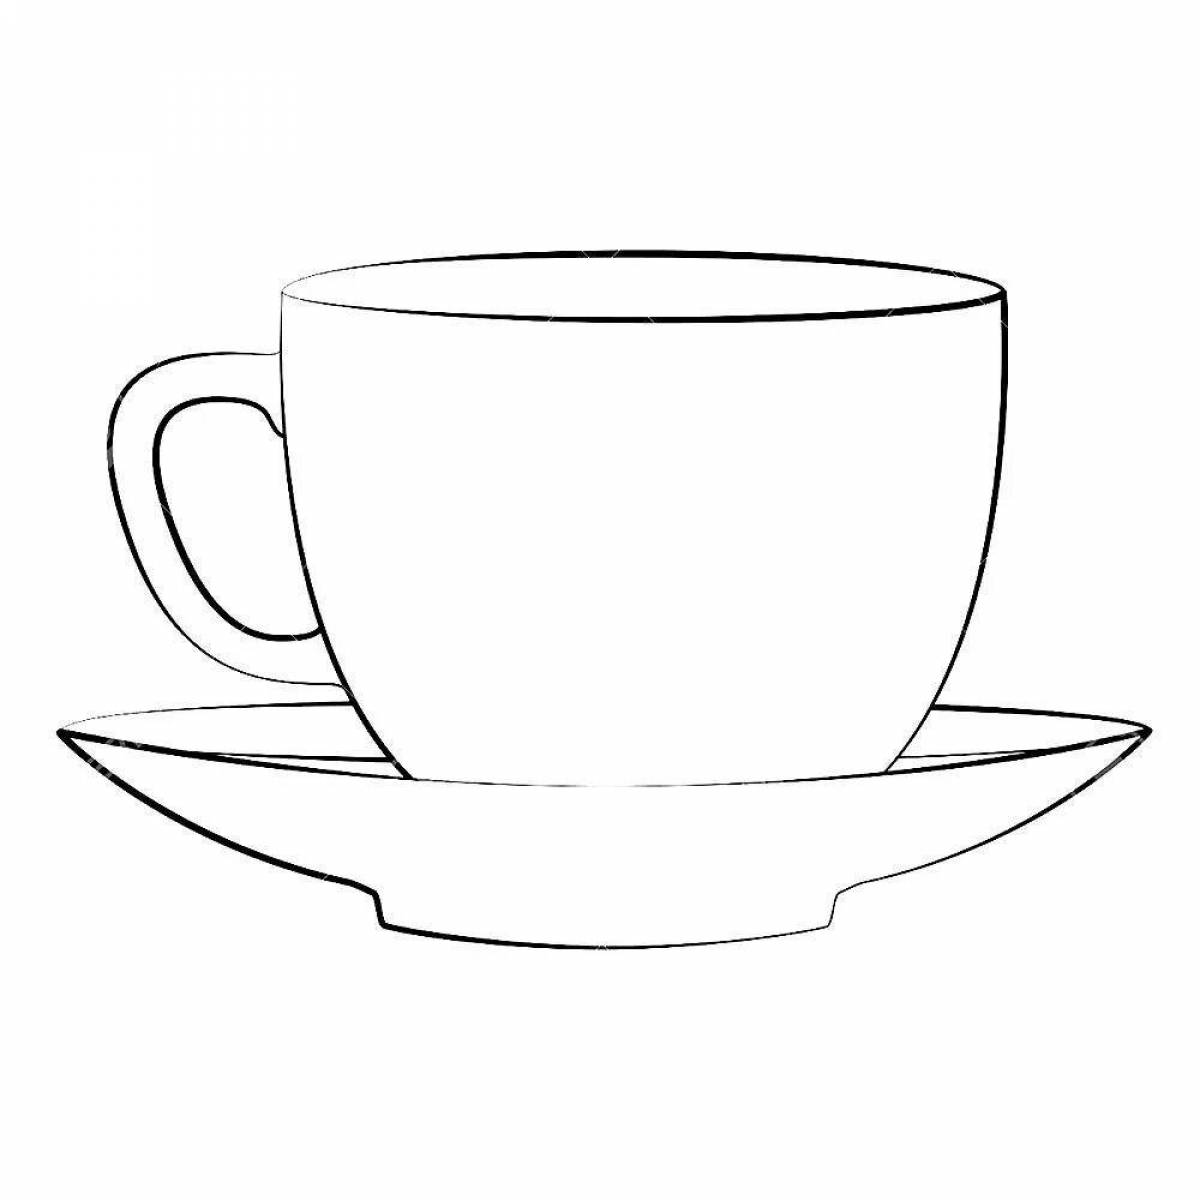 Nice tea cup coloring book for kids